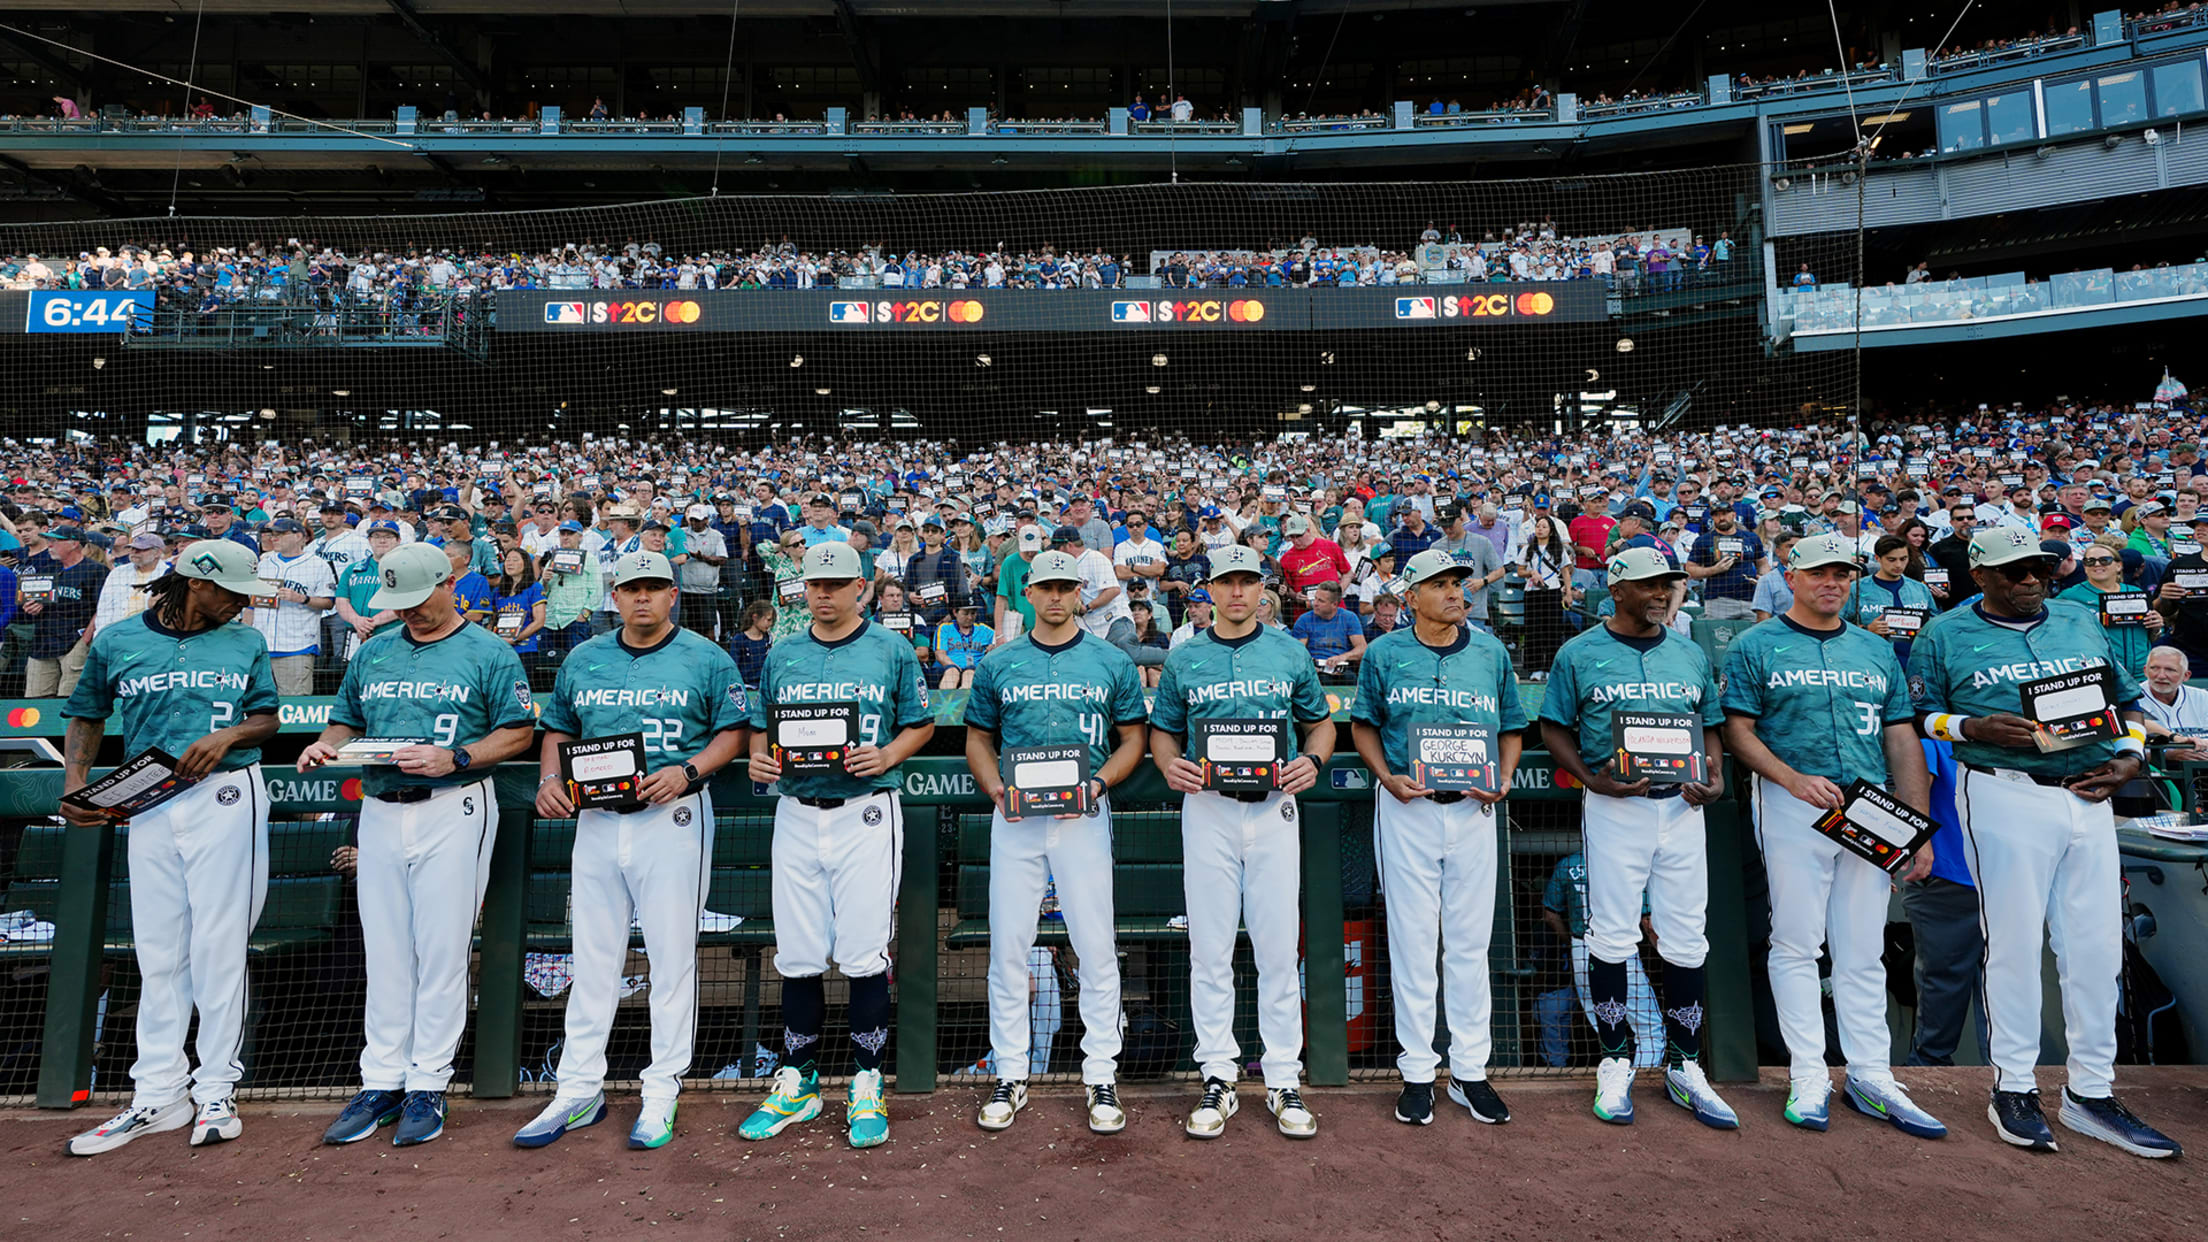 American League players line up in front of their dugout holding signs with loved ones' names on them